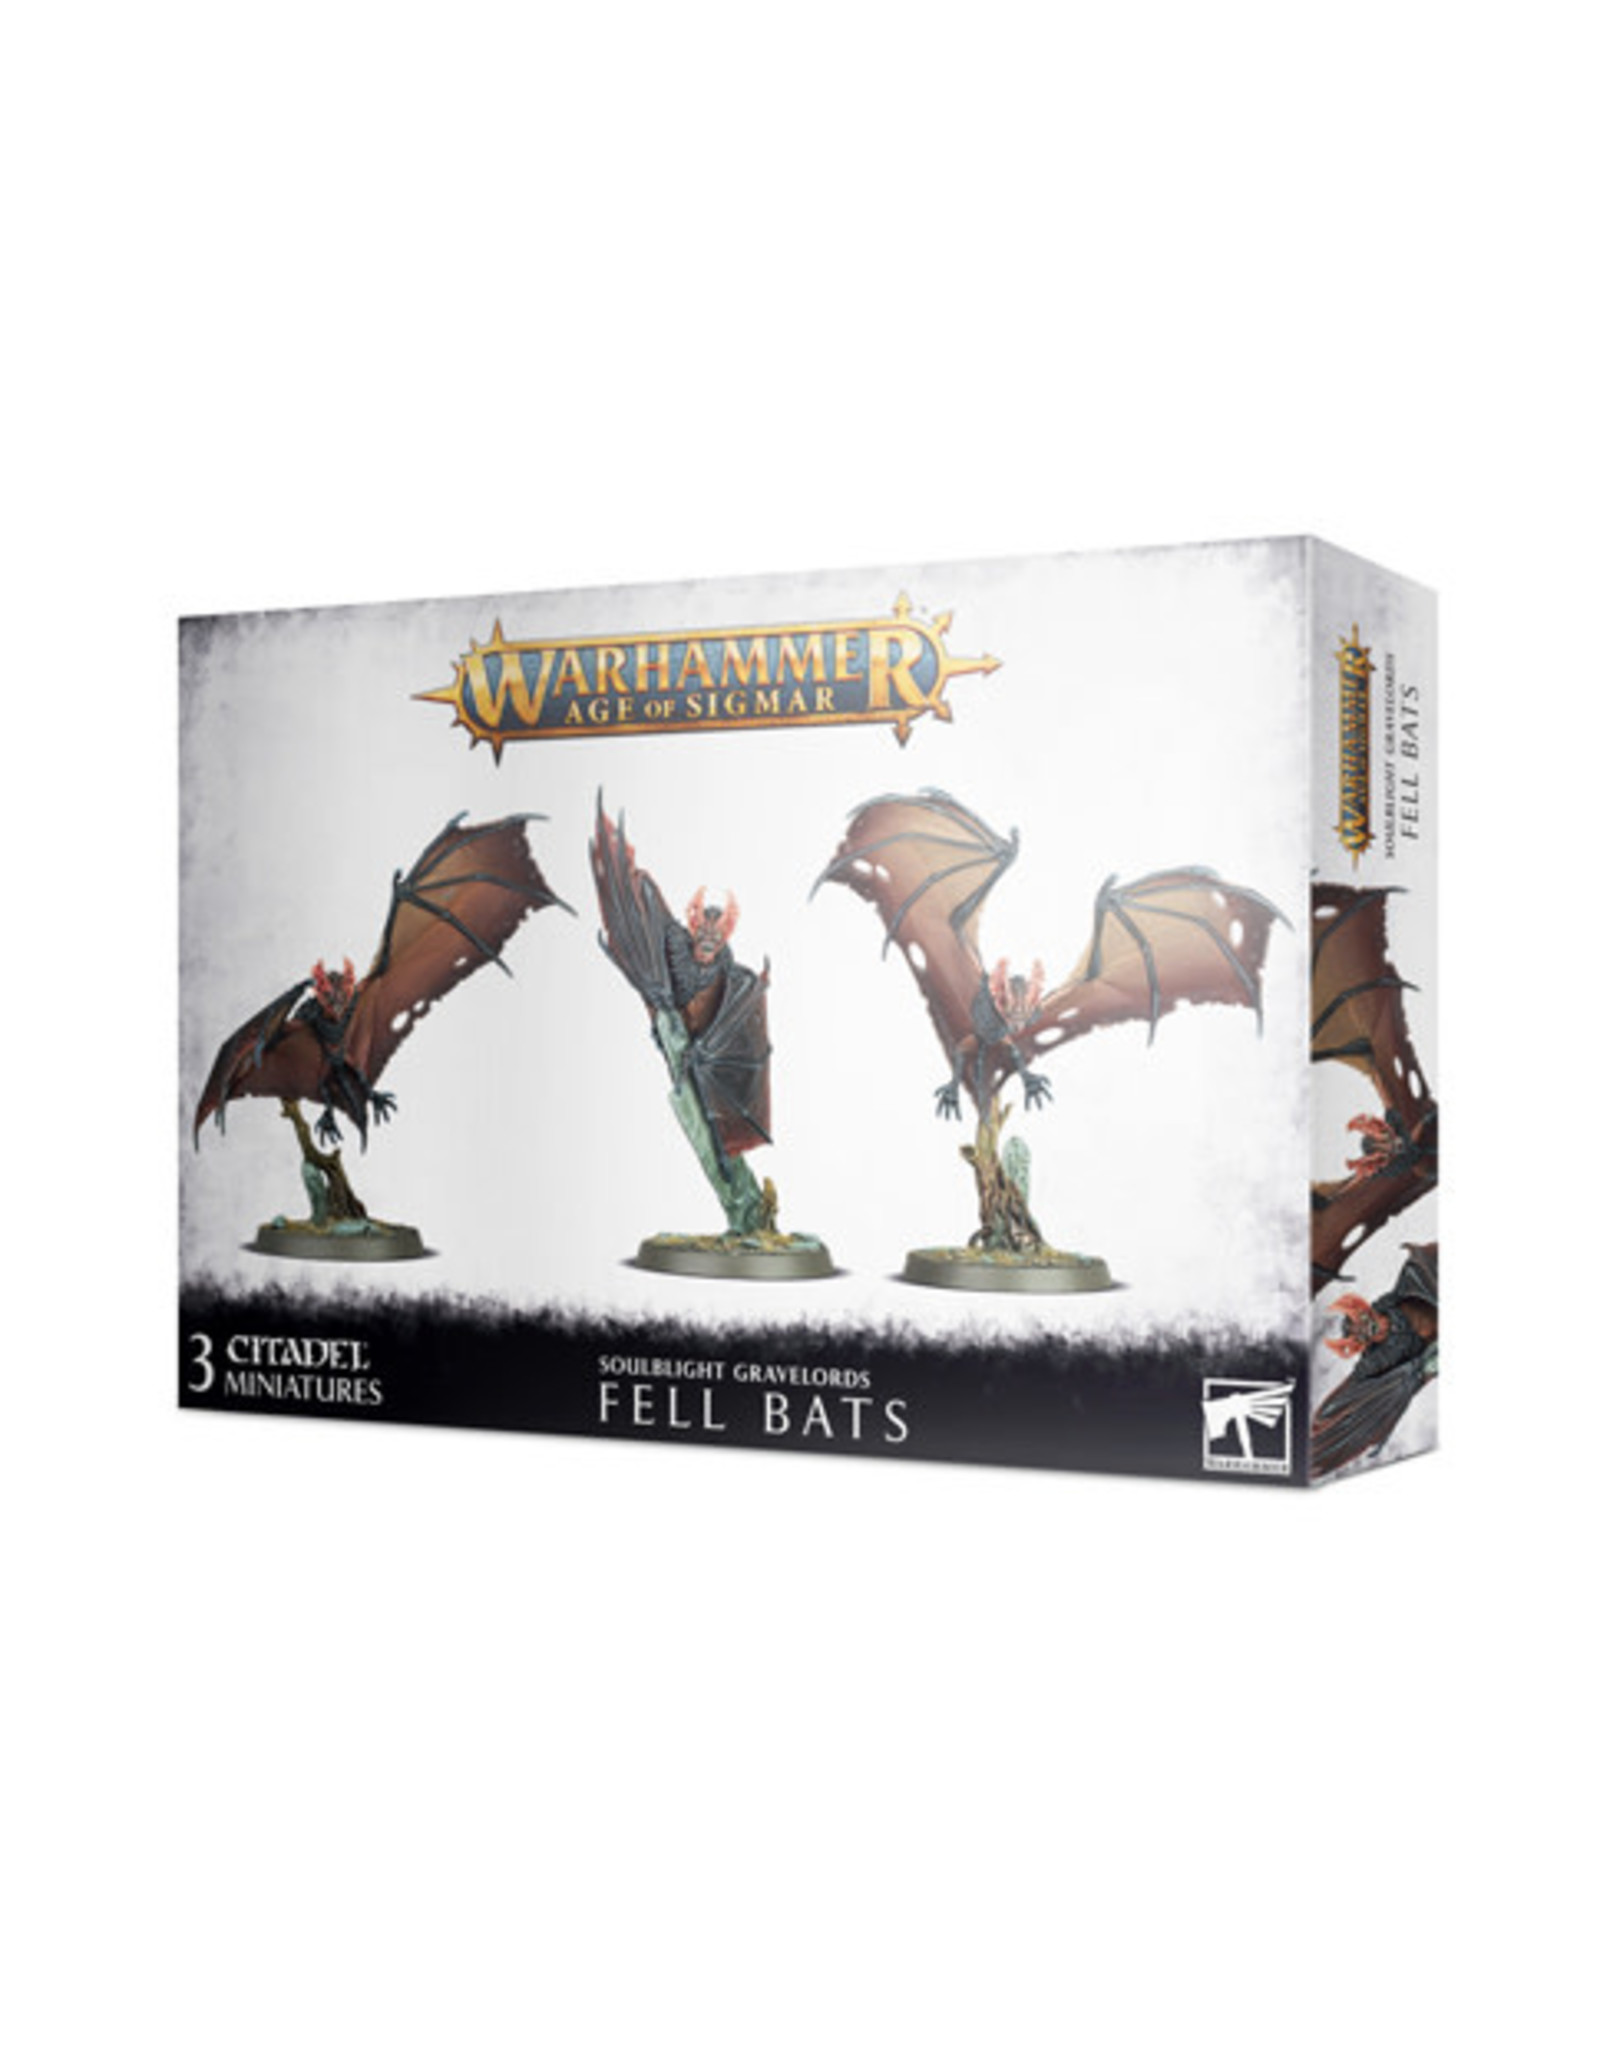 Age of Sigmar Soulblight Gravelords Fell Bats